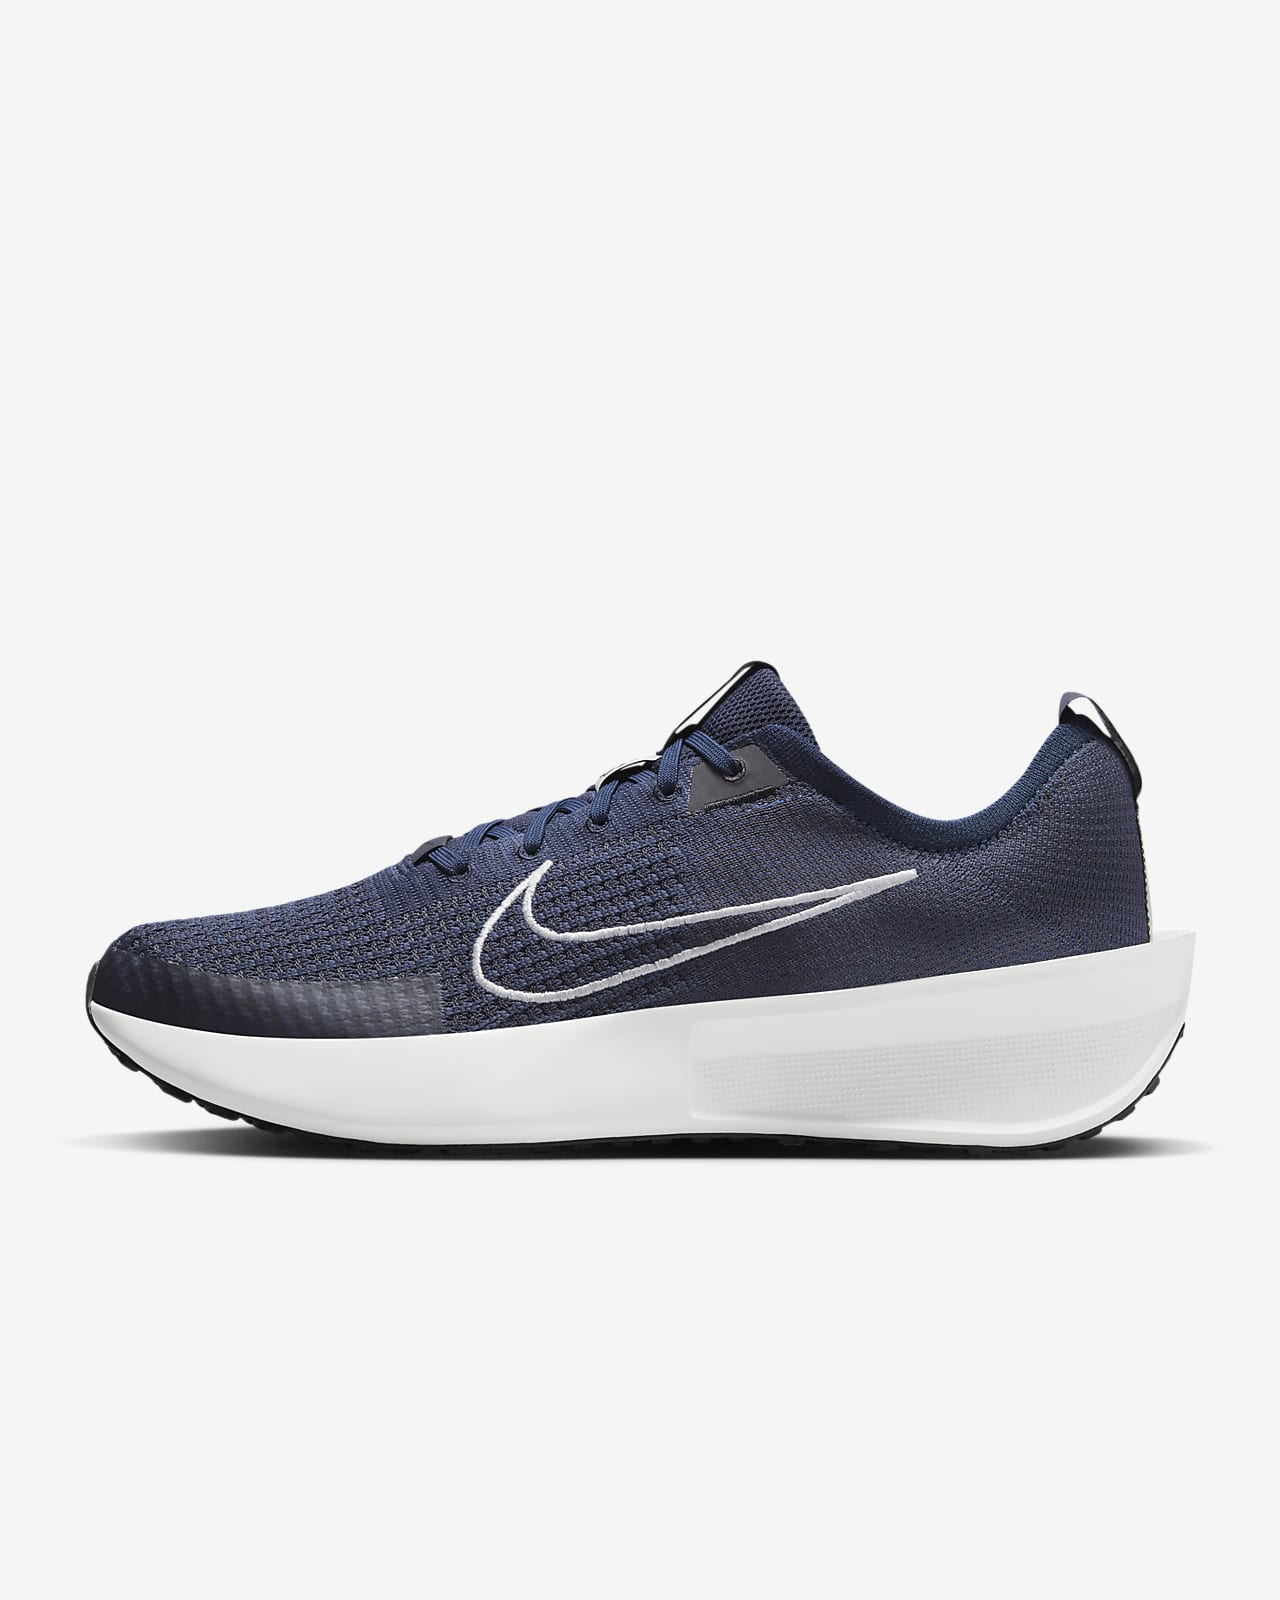 How to Find the Best Shoes for Wide Feet. Nike.com